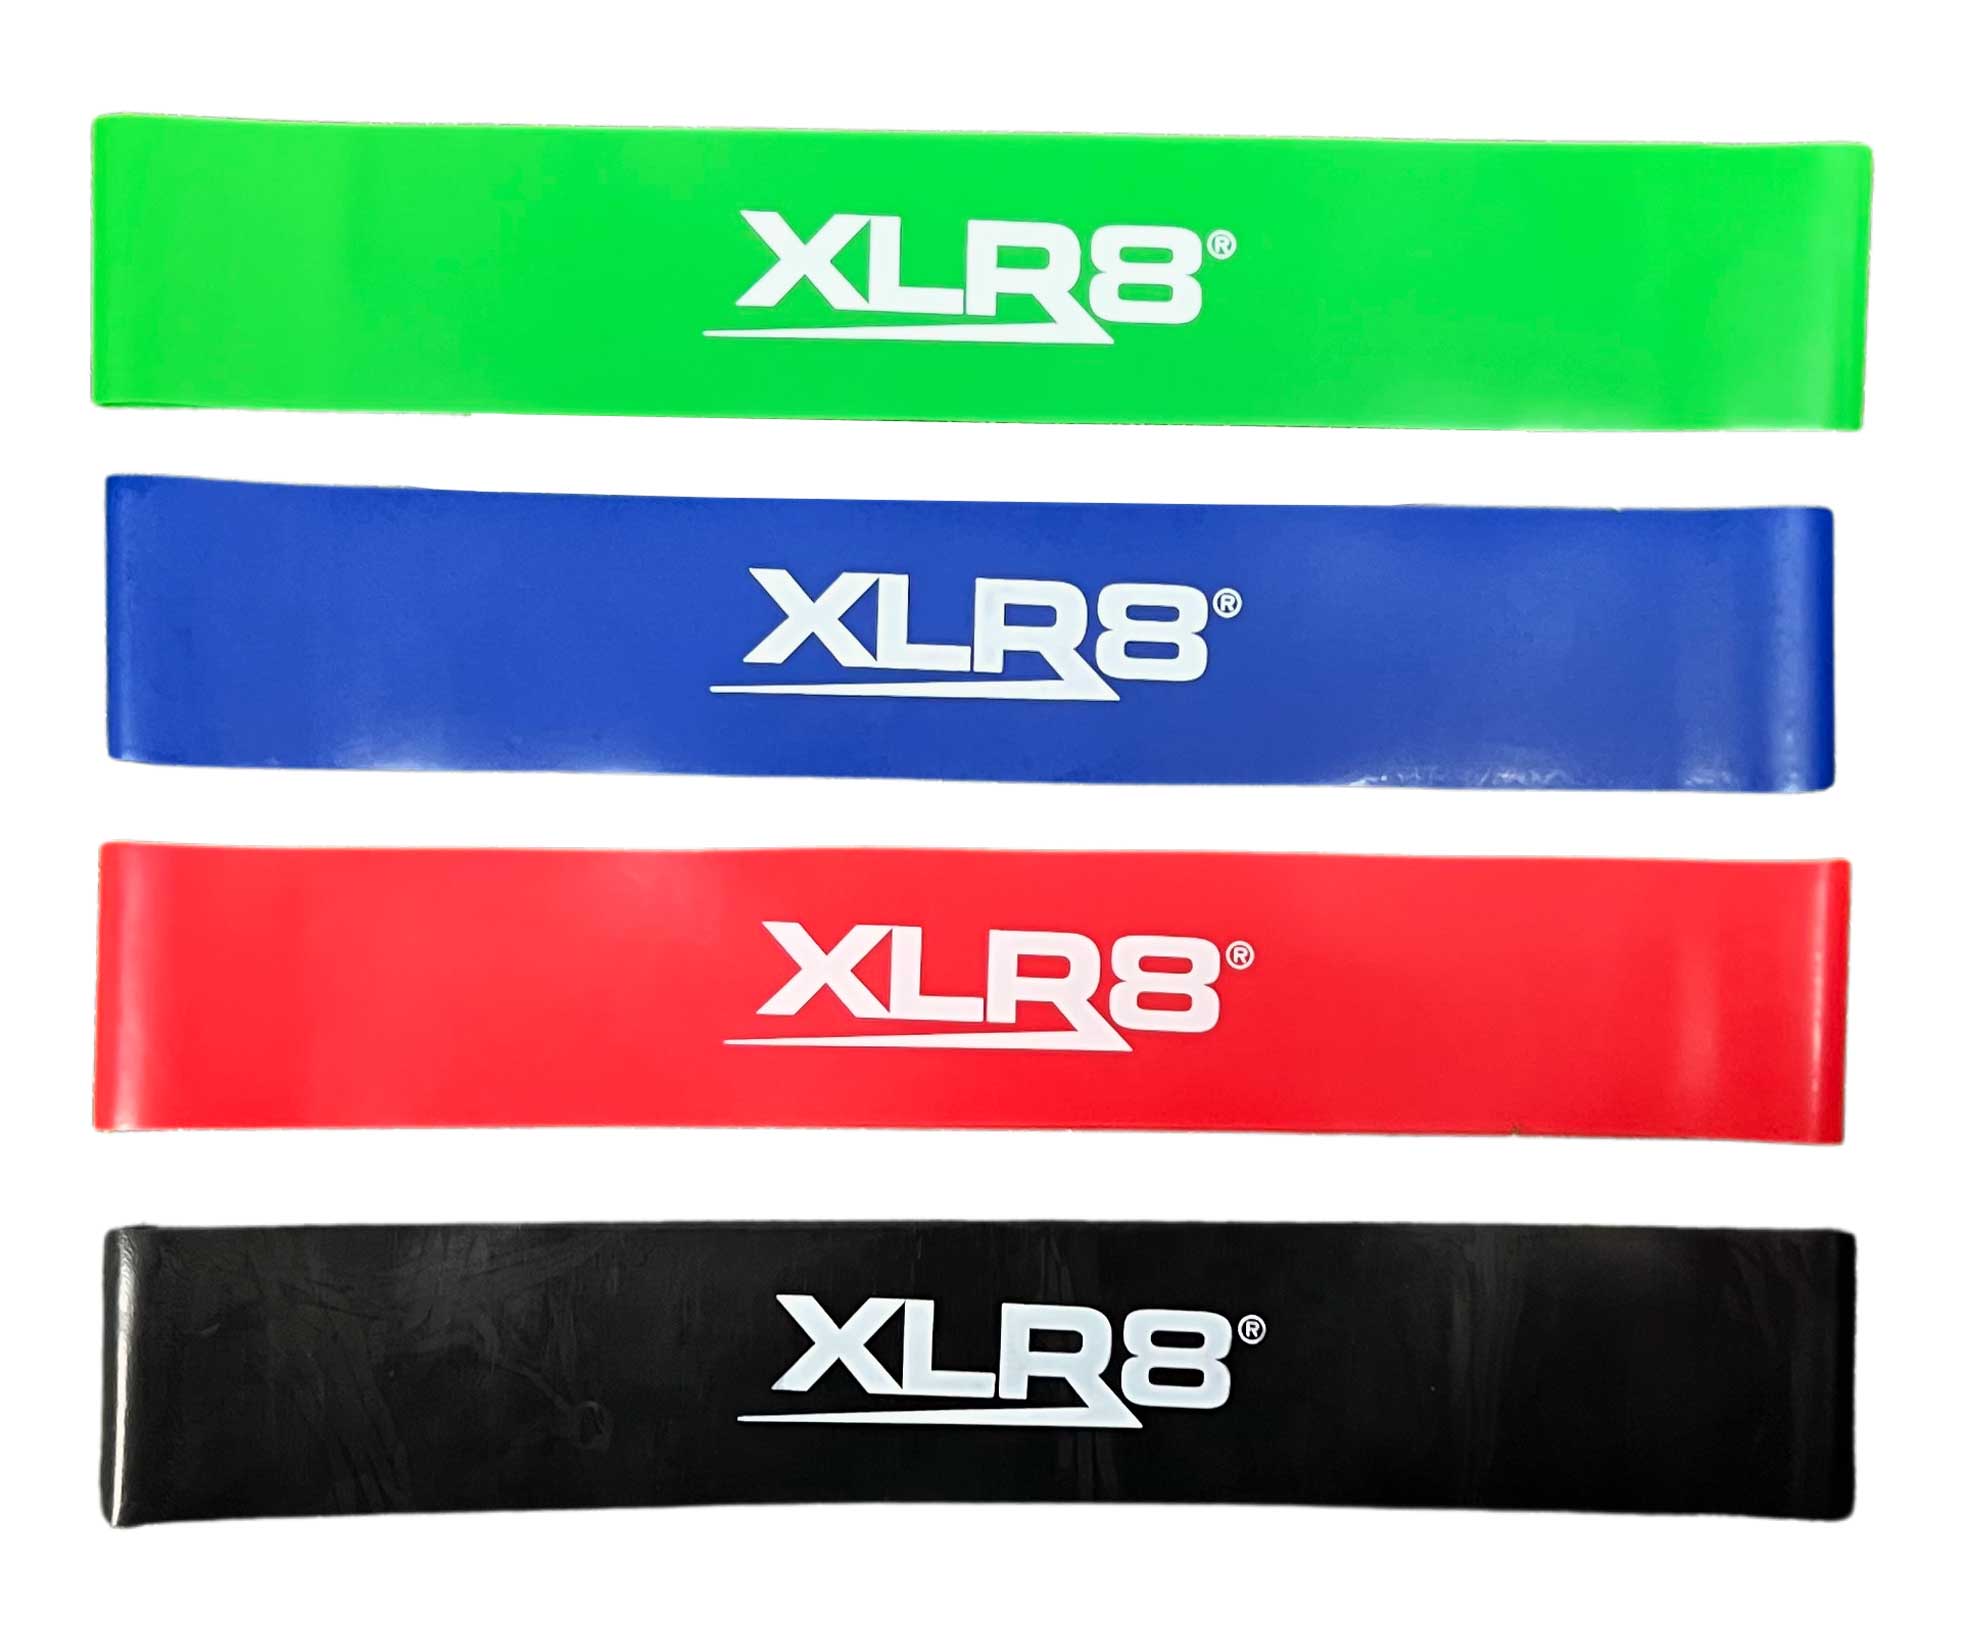 EOX Exercise Resistance Fabric Bands, Non-Slip Resistance Loop Workout  Bands for Strength Training, Physical Therapy,Legs and Glutes, 5 Resistance